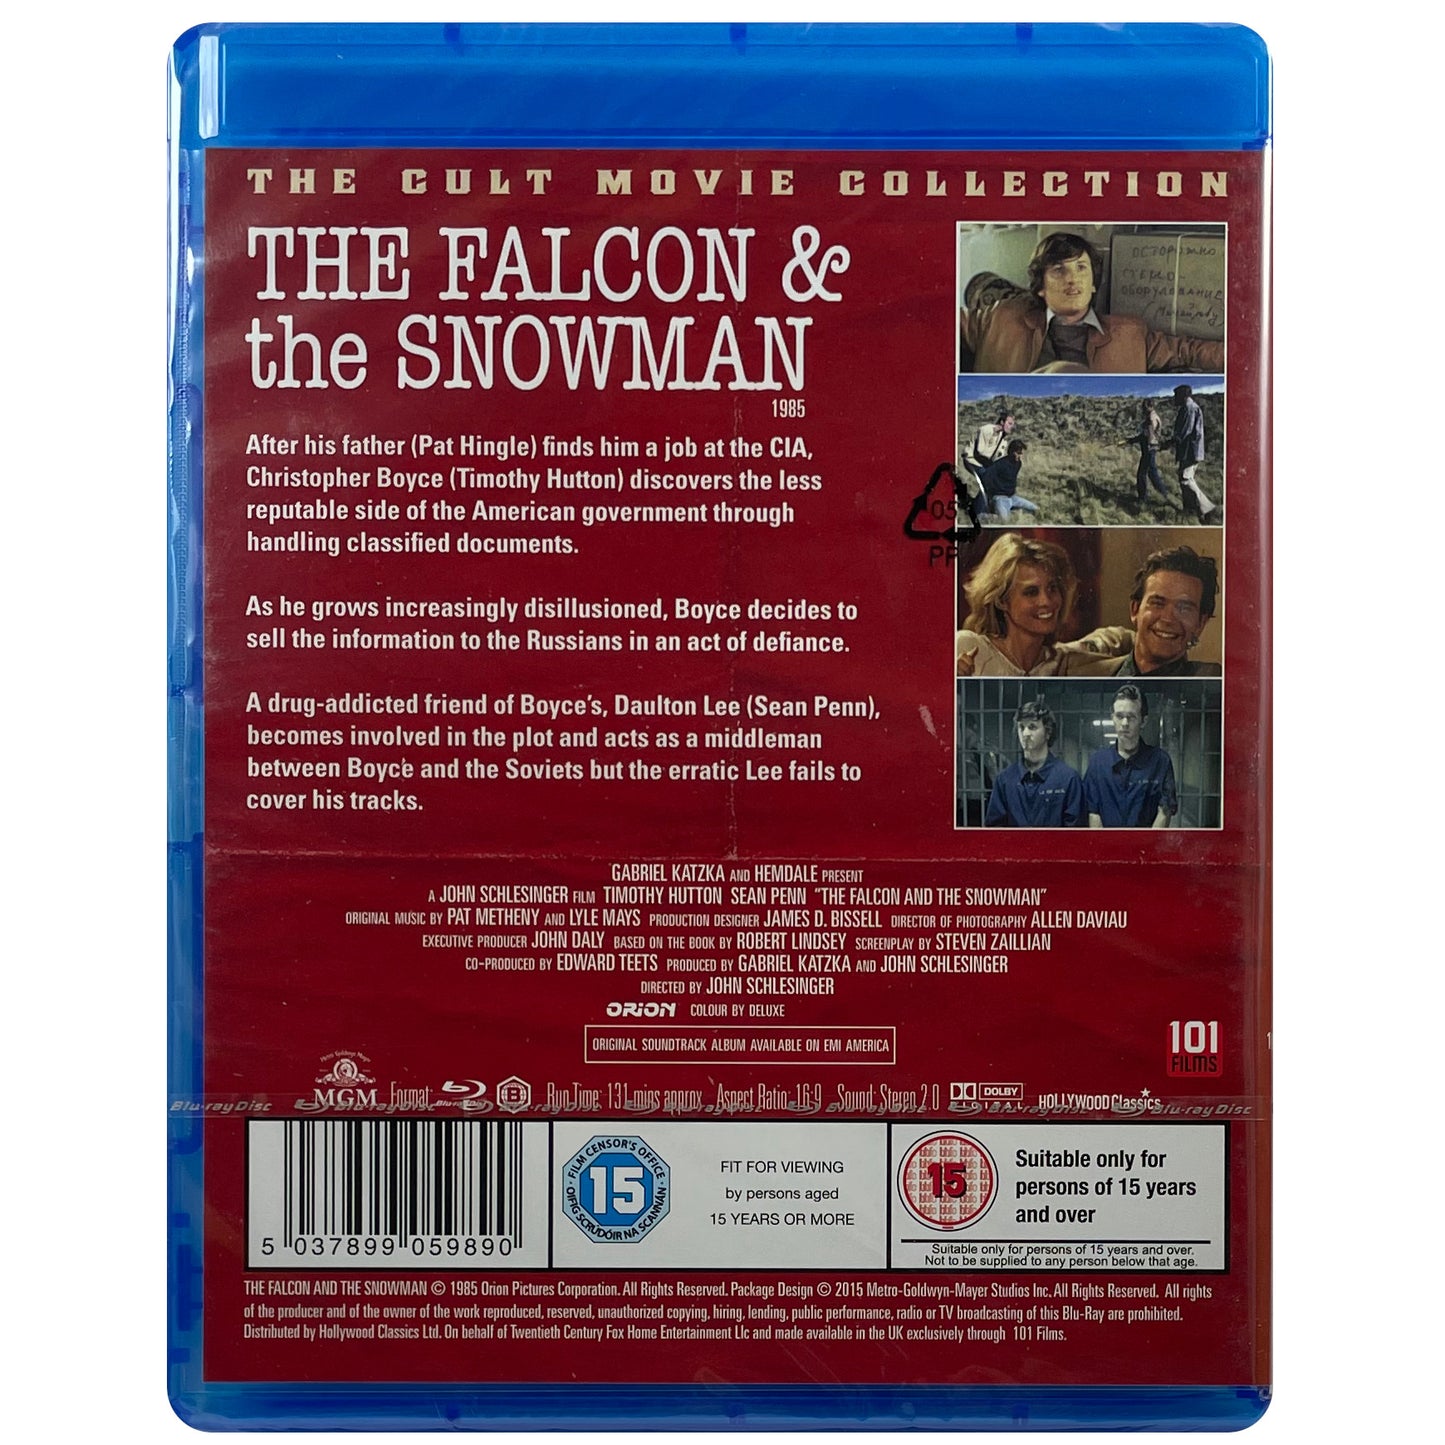 The Falcon and the Snowman Blu-Ray